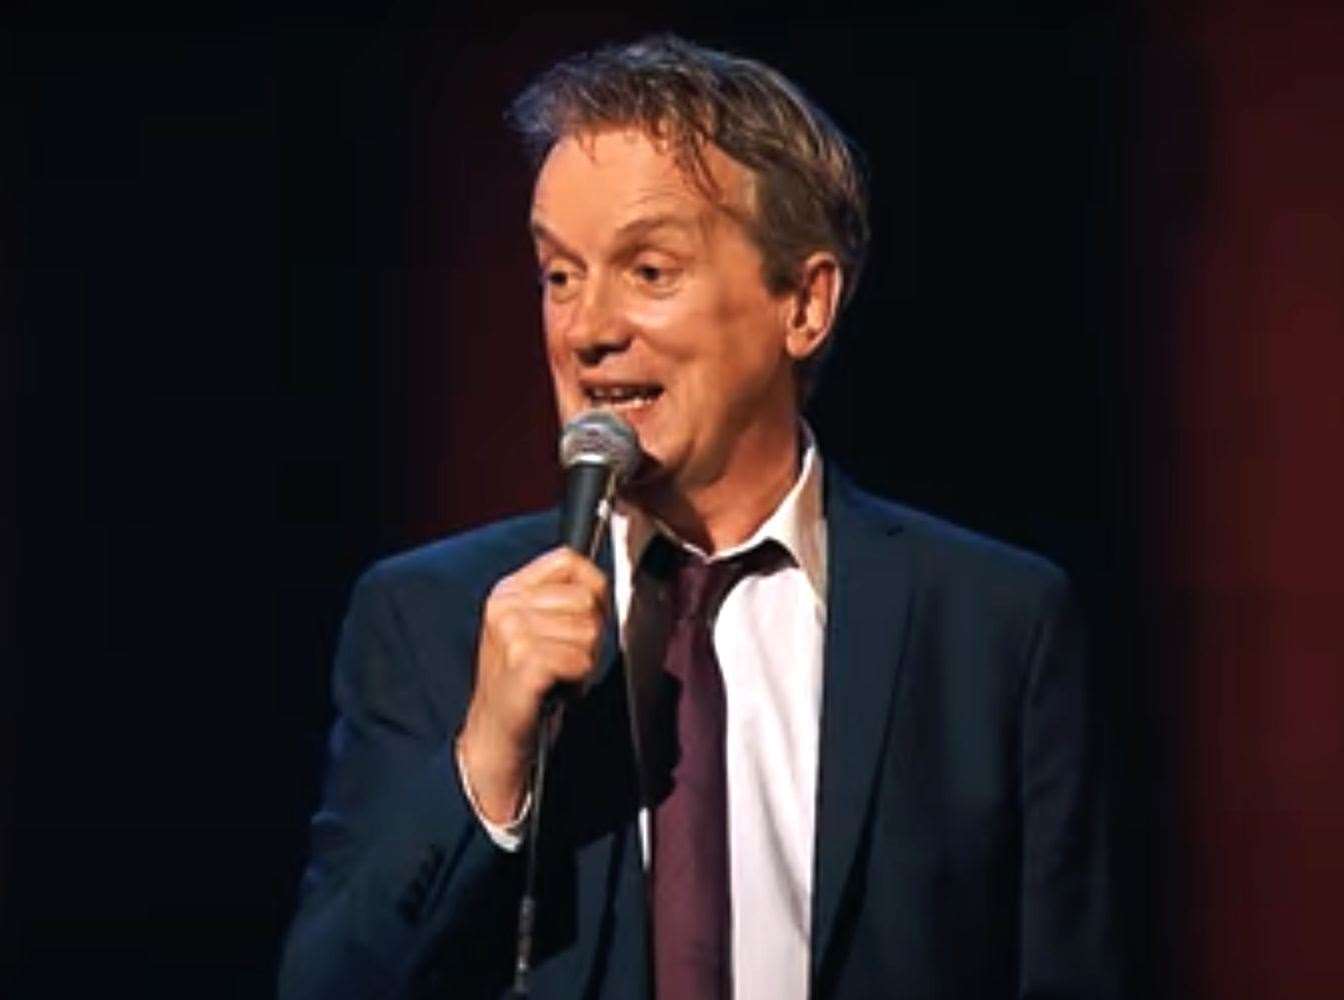 Frank Skinner will be appearing at Ipswich. Picture: FrankSkinnerlive.com/Avalon